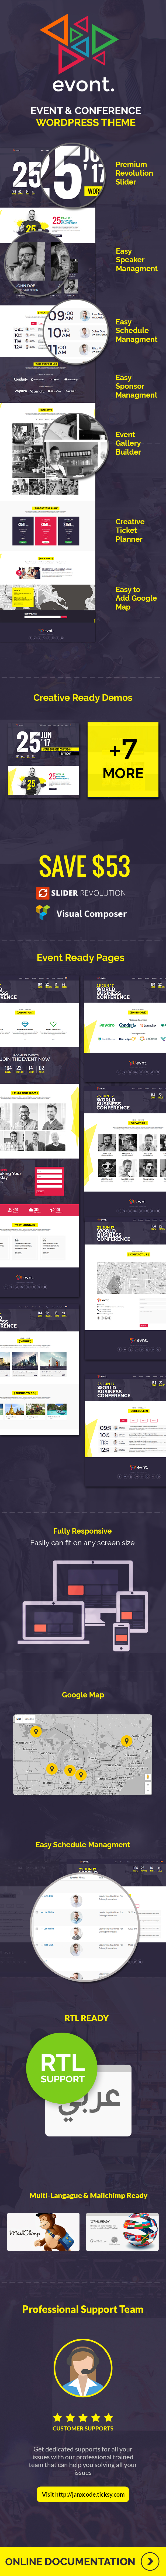 Evont - Event And Conference WordPress Theme - 2